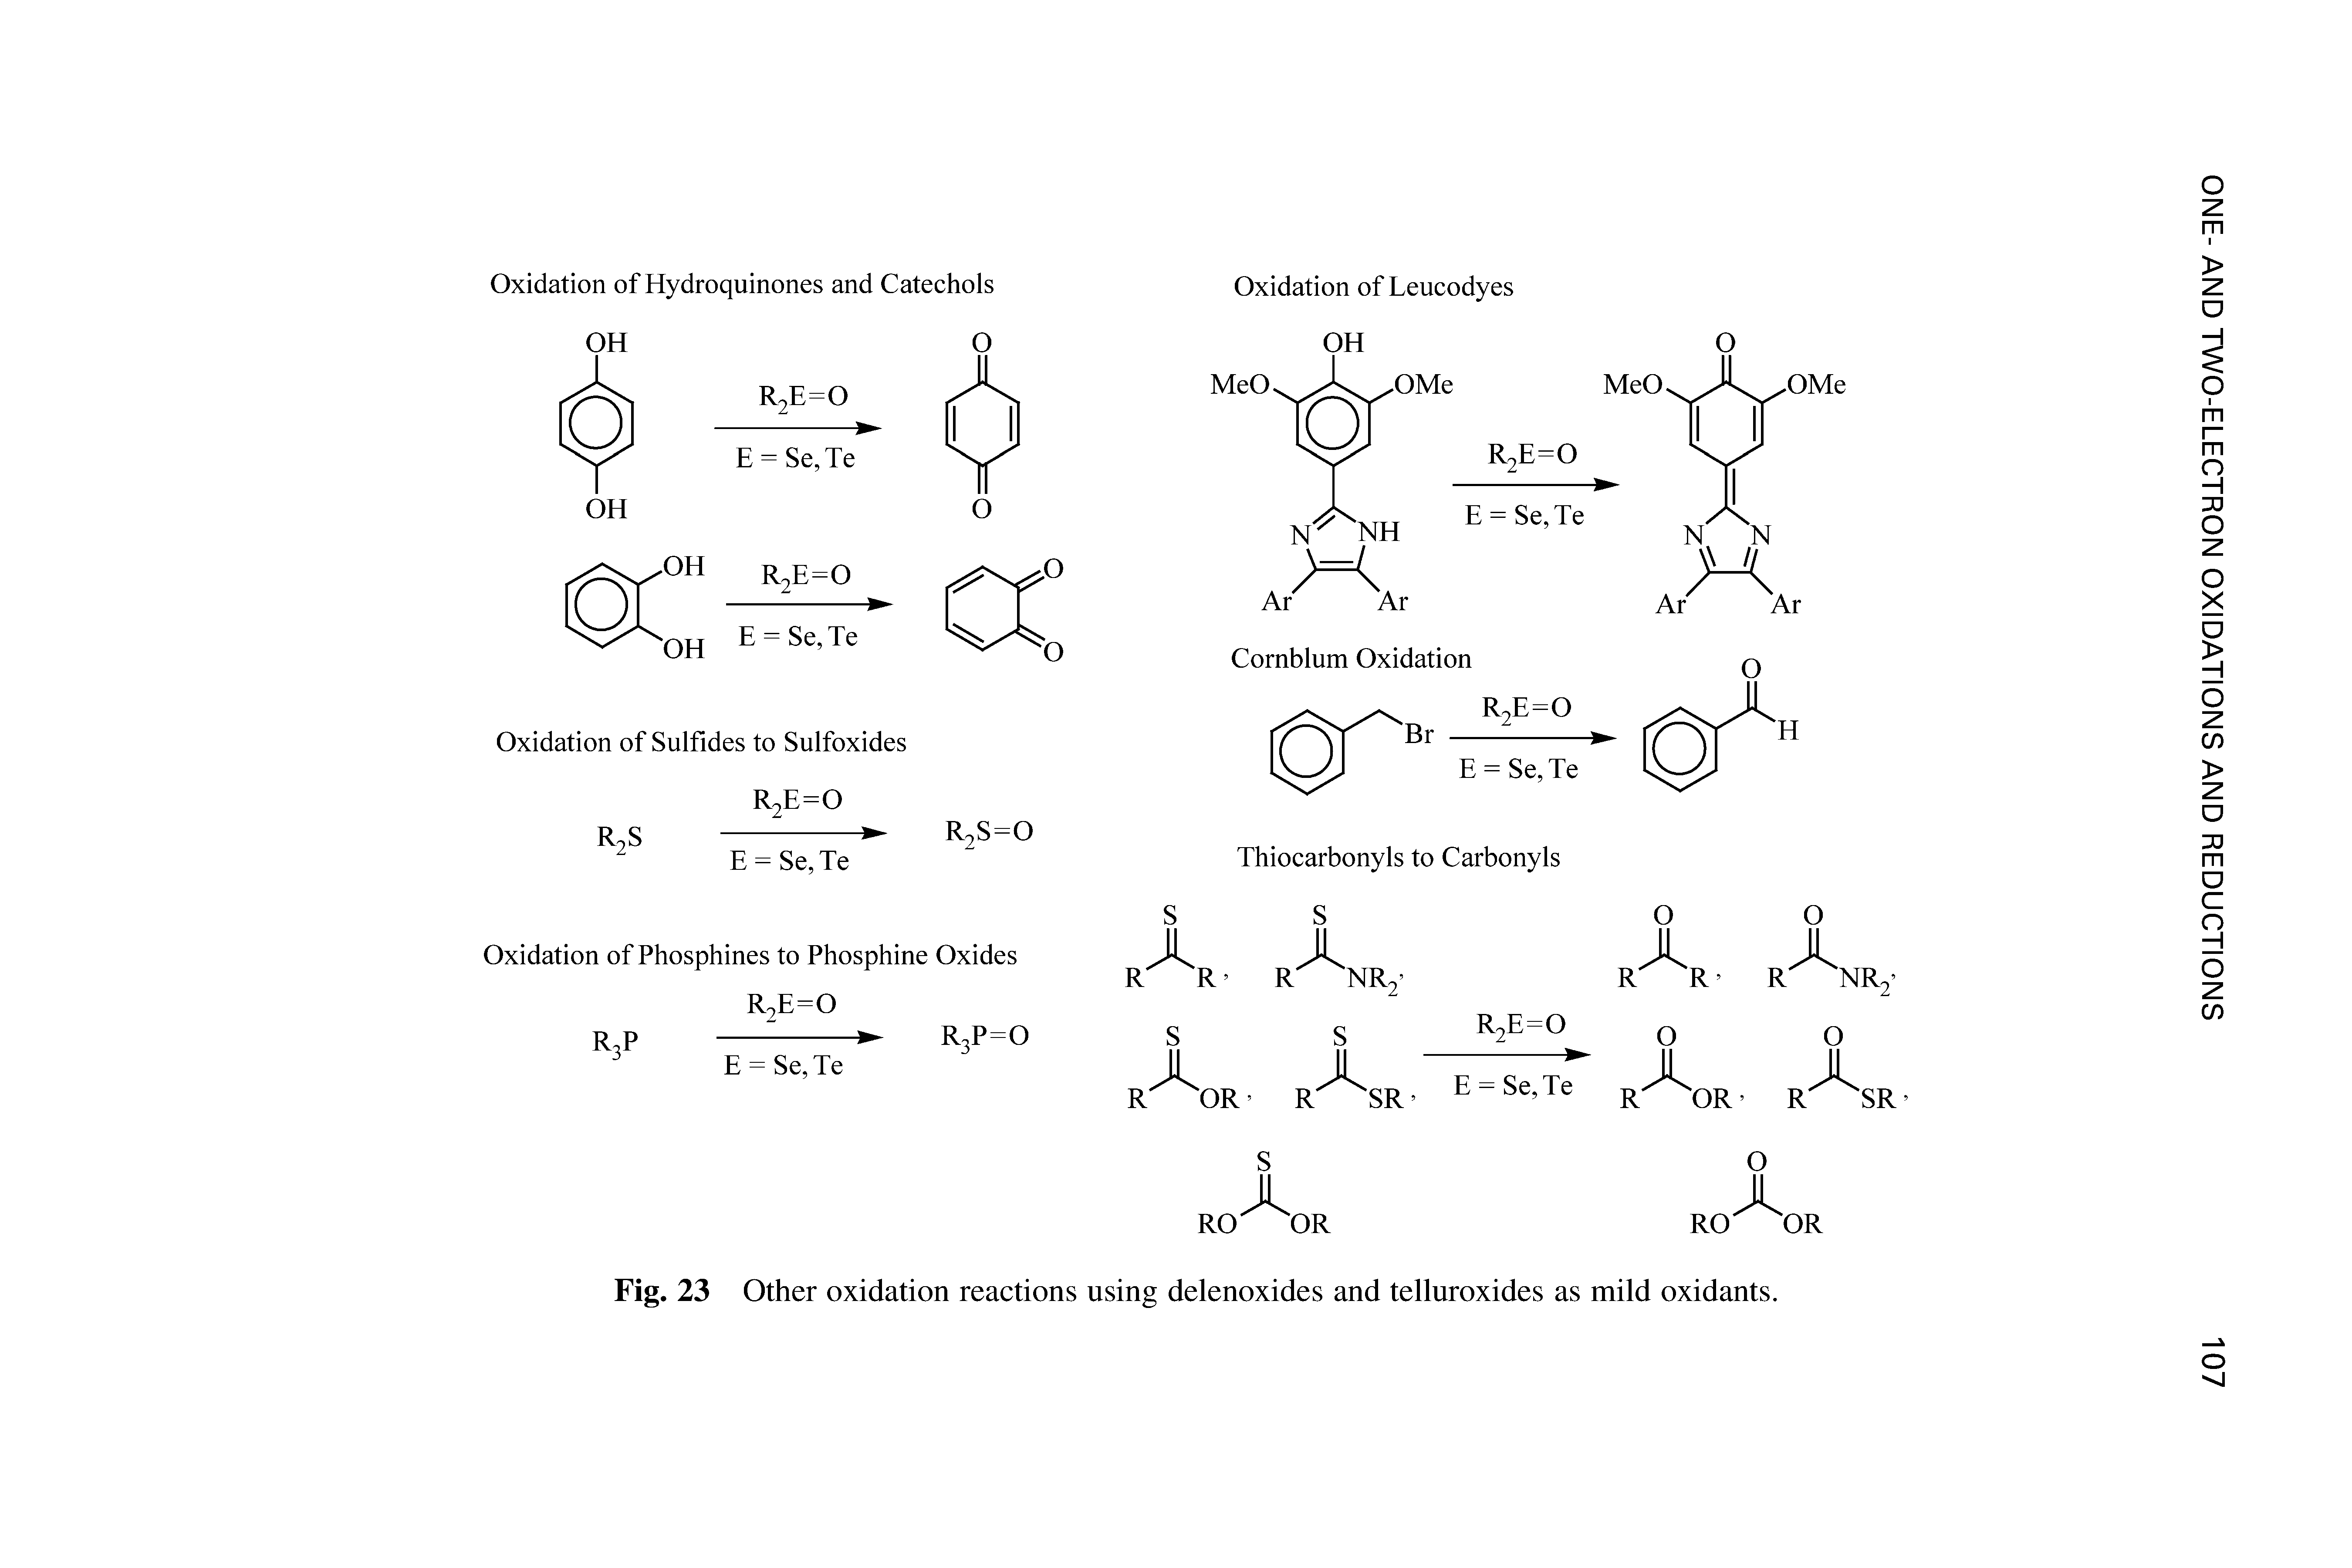 Fig. 23 Other oxidation reactions using delenoxides and telluroxides as mild oxidants.